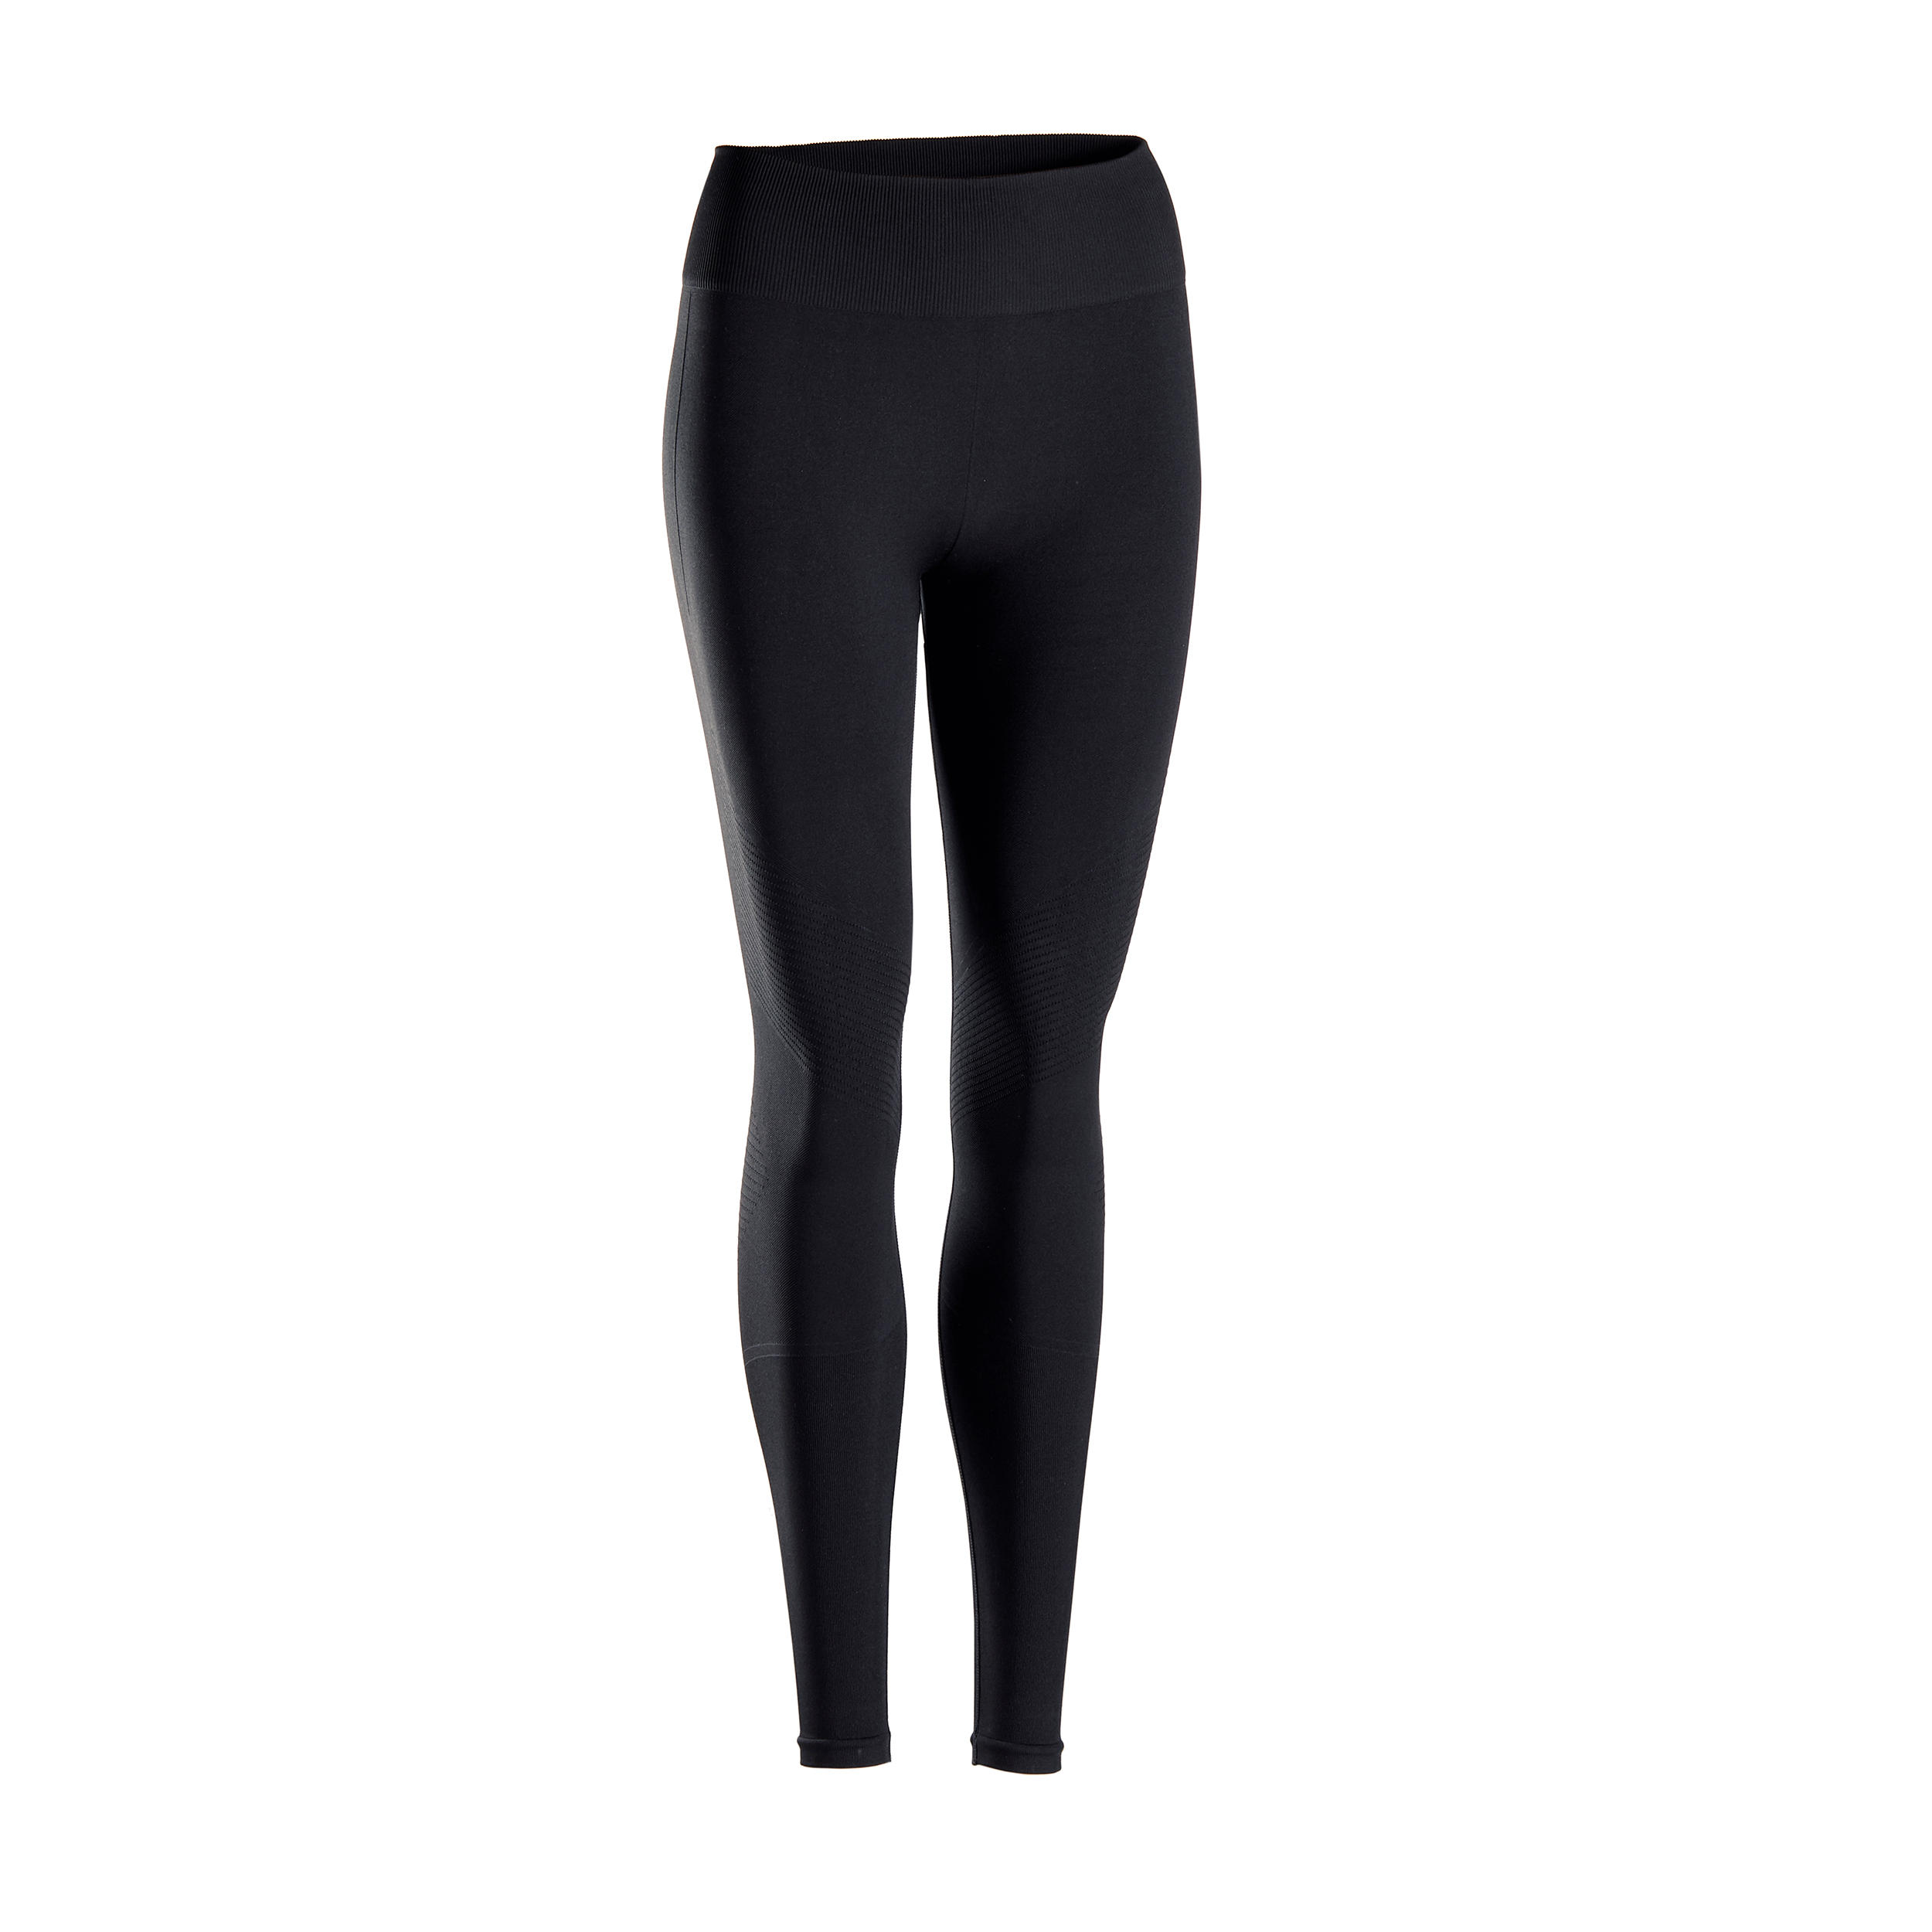 Autumn Style Black Push Up Decathlon Leggings Soft Polyester High Waist  Slim Fit Sportswear For Girls Perfect Gift 201109 From Dou04, $7.41 |  DHgate.Com